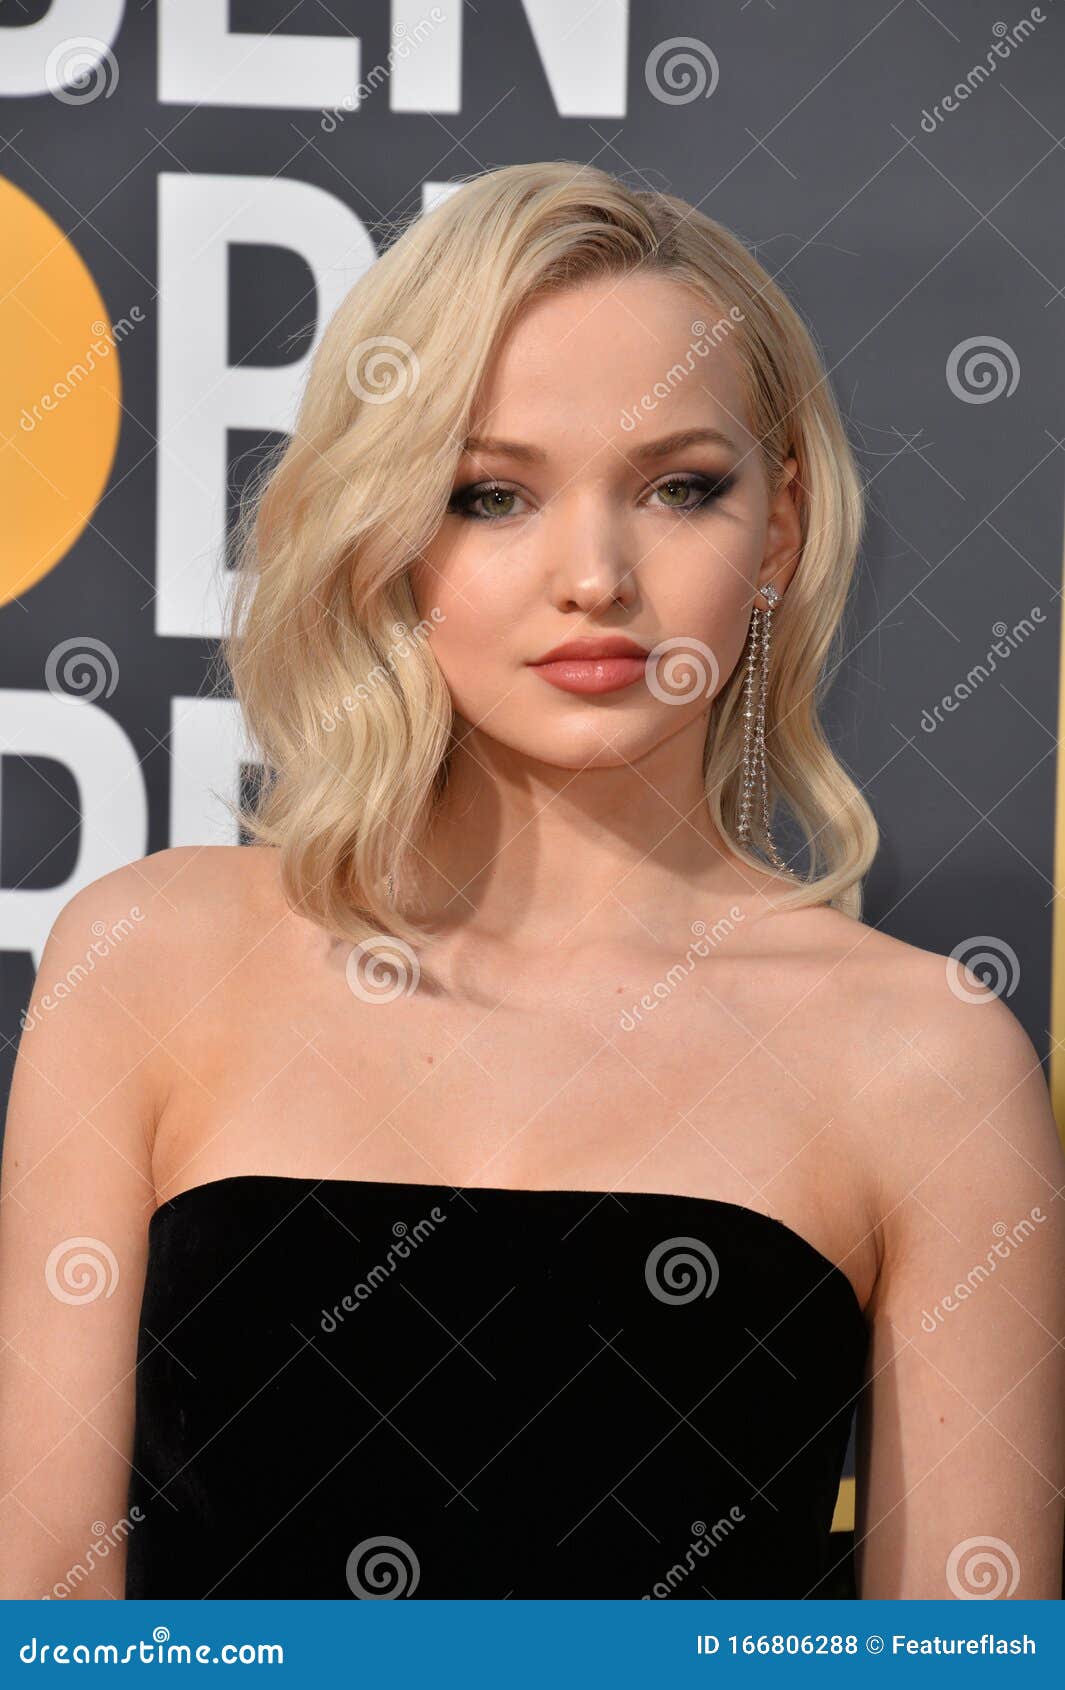 122 Dove Cameron Photos Free Royalty Free Stock Photos From Dreamstime